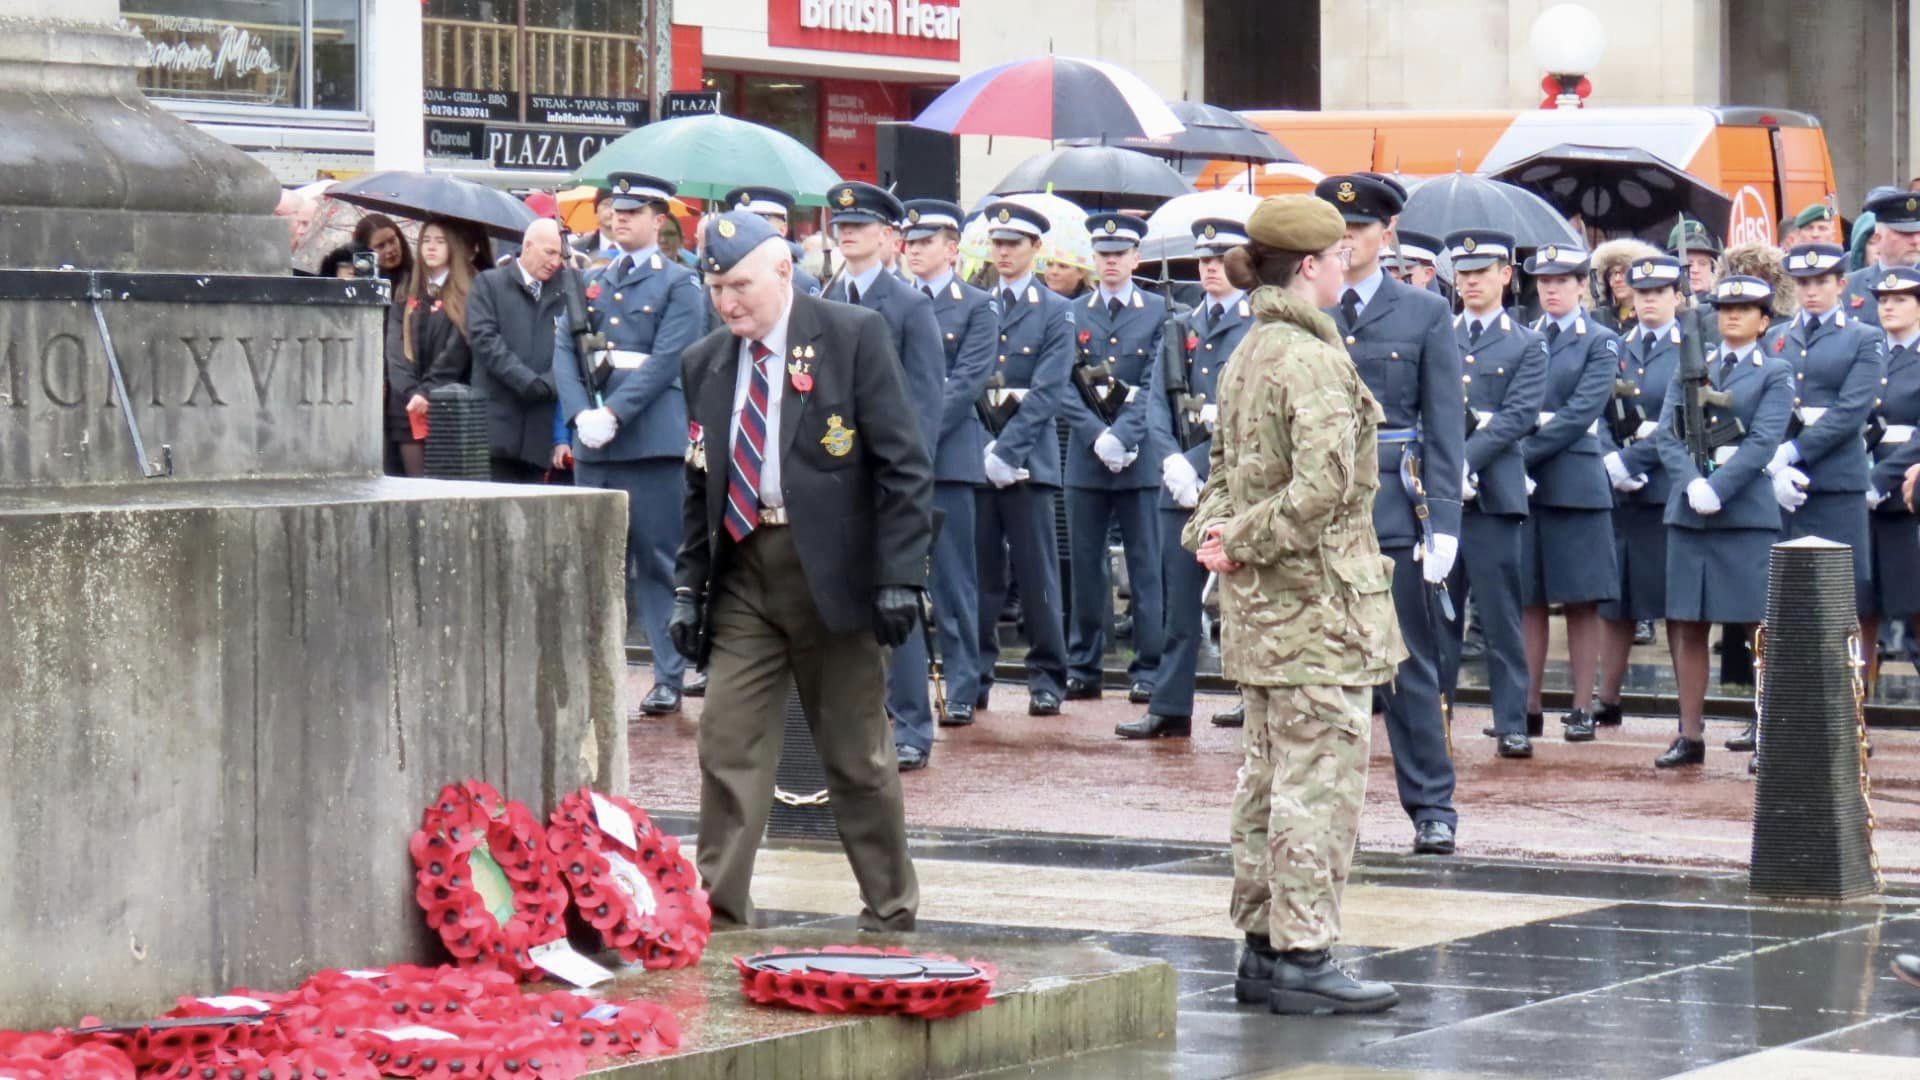 Hundreds of people attended the Remembrance Sunday parade and service in Southport. Photo by Andrew Brown Stand Up For Southport